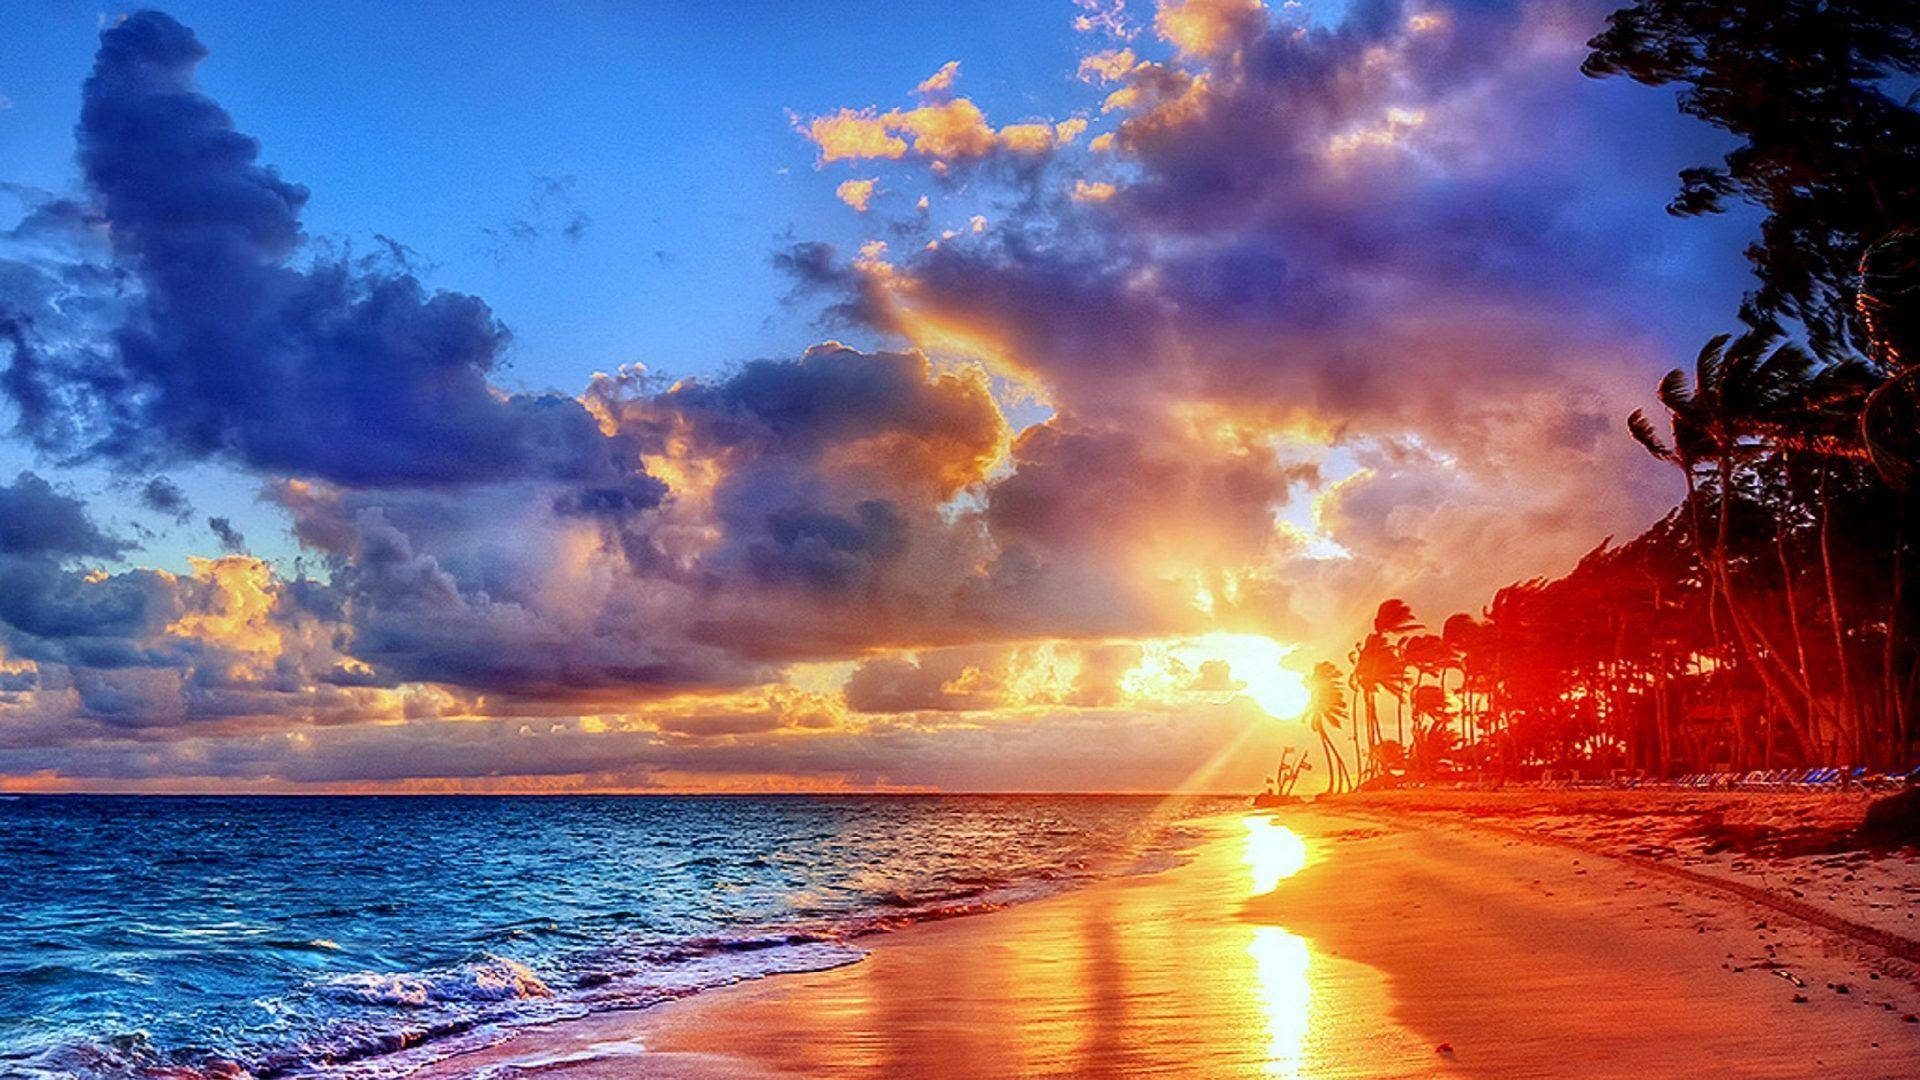 Colorful Dominican Republic Sunset Wallpaper